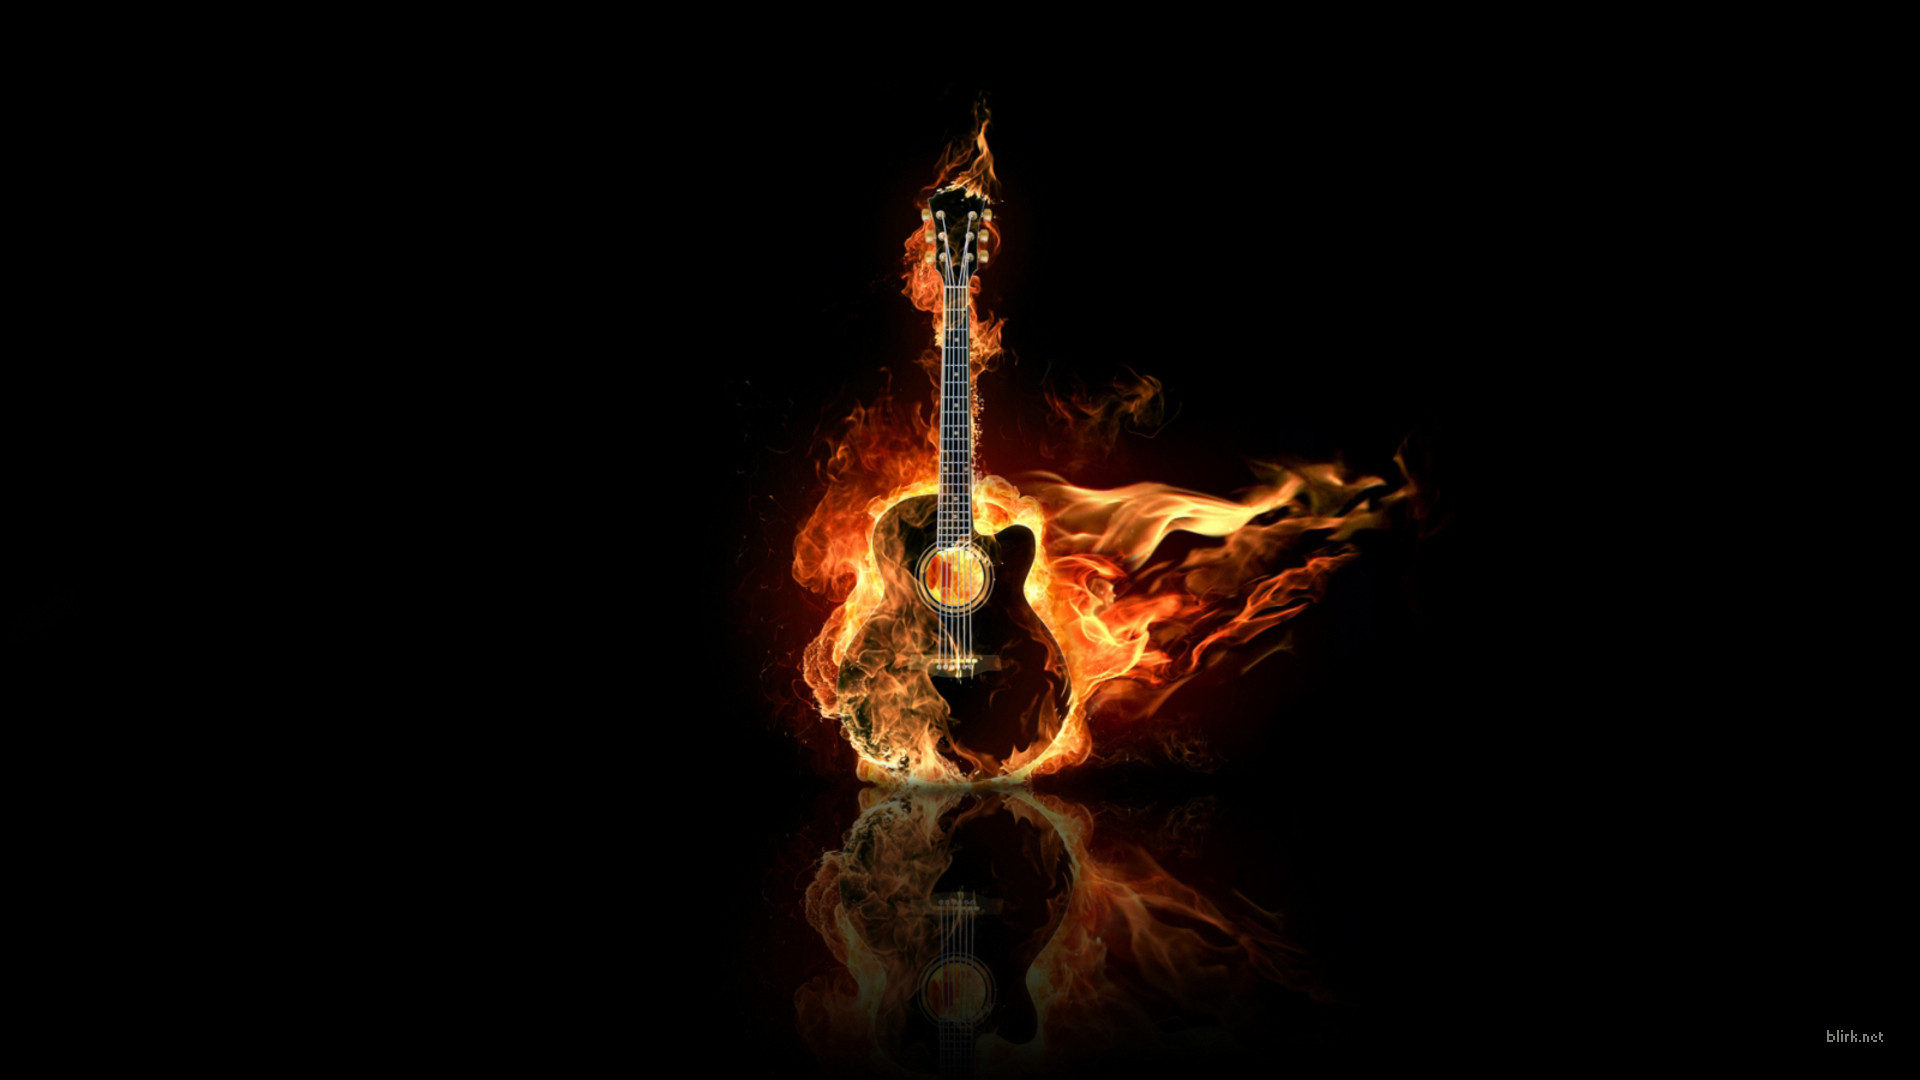 Cool Guitar Wallpapers 8658 Hd Wallpapers in Music   Imagescicom